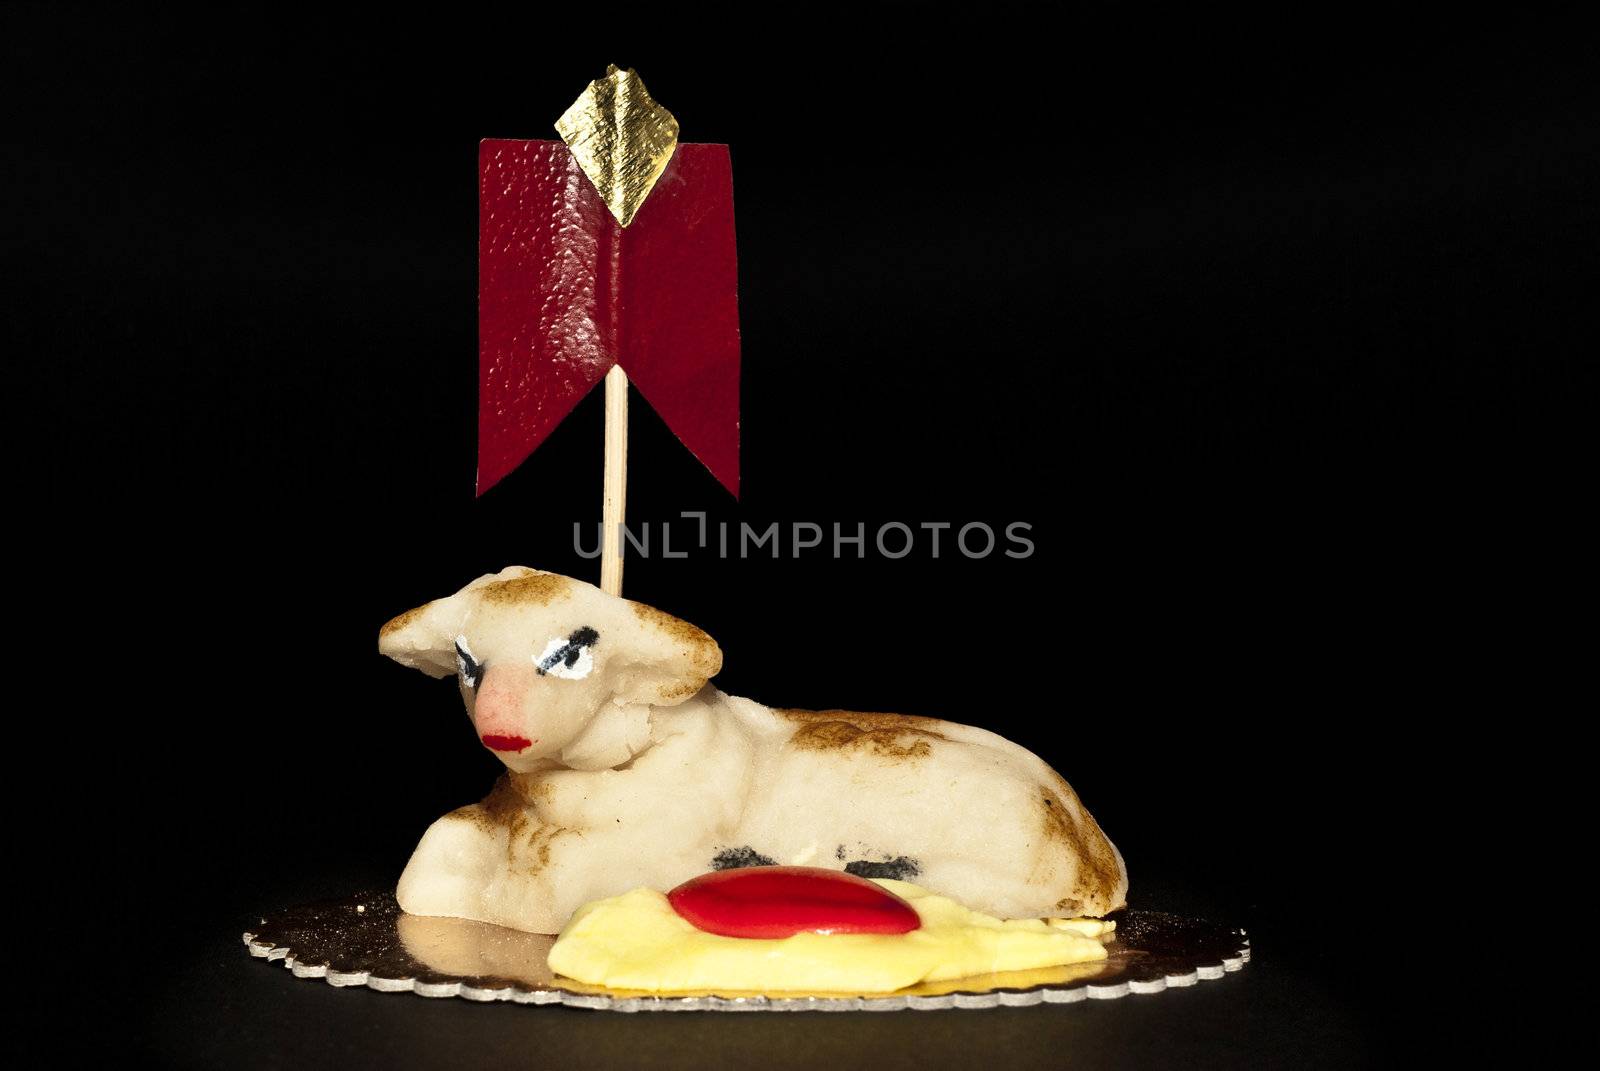 Homemade marzipan  Sheep cake, Easter cake typical in Sicily, isolated on black